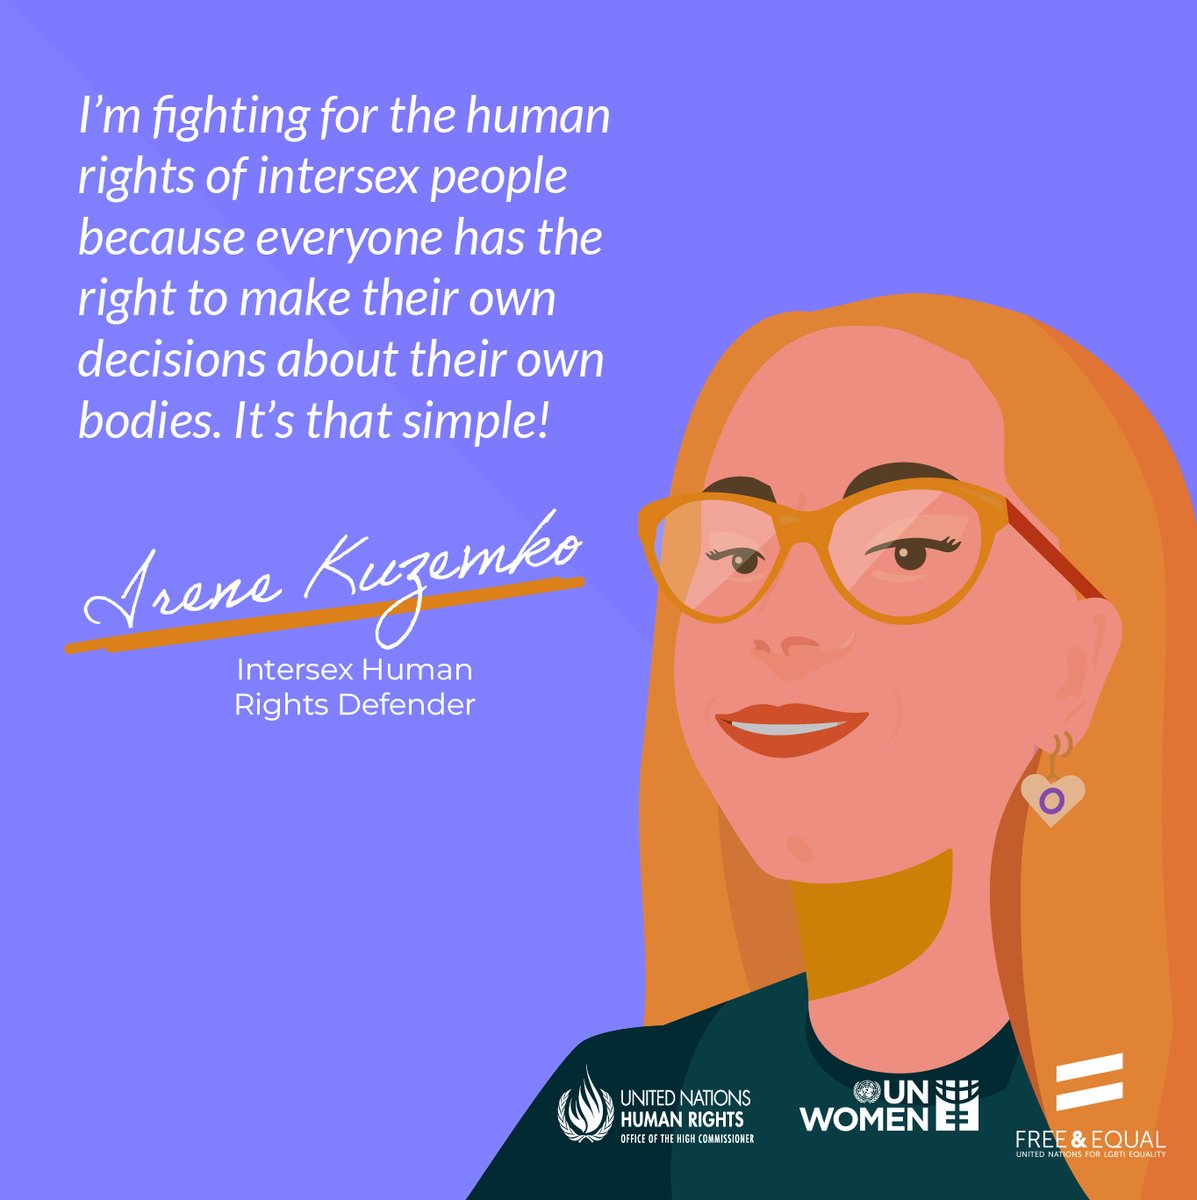 Irene Kuzemko, a devoted #intersex human rights defender from Ukraine and Russia demands respect for everyone’s bodily integrity – intersex people included. #IStandWithHer – will you? #AllWomen #StandUp4HumanRights #IWD2022'